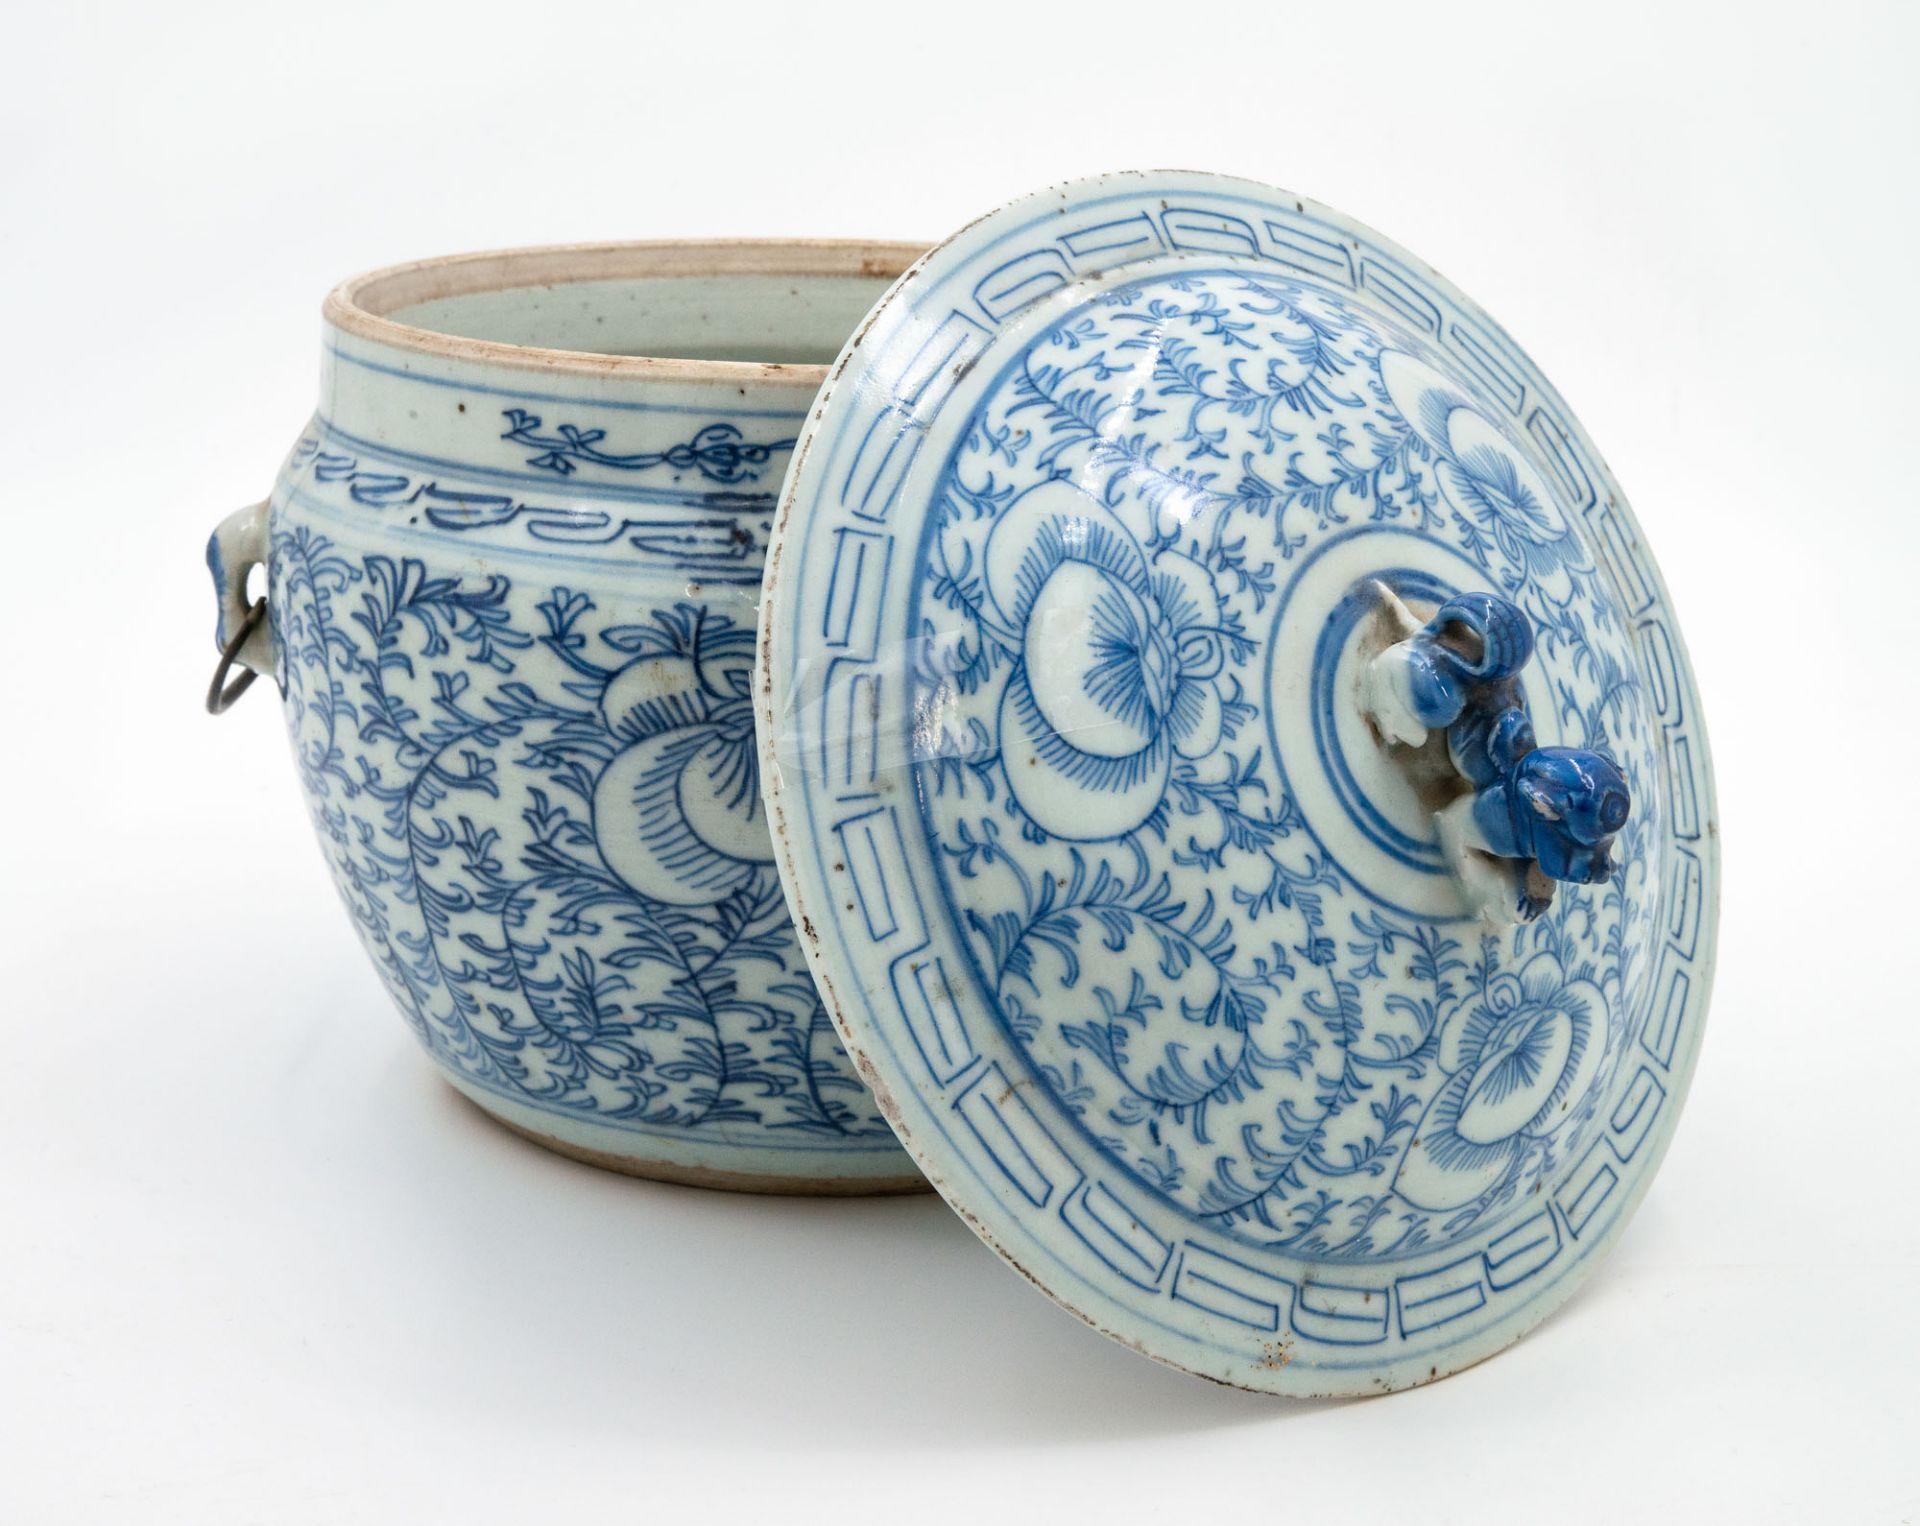 A Blue and White Porcelain Lidded Jar, China, Qing Dynasty, 19th Century - Image 4 of 8